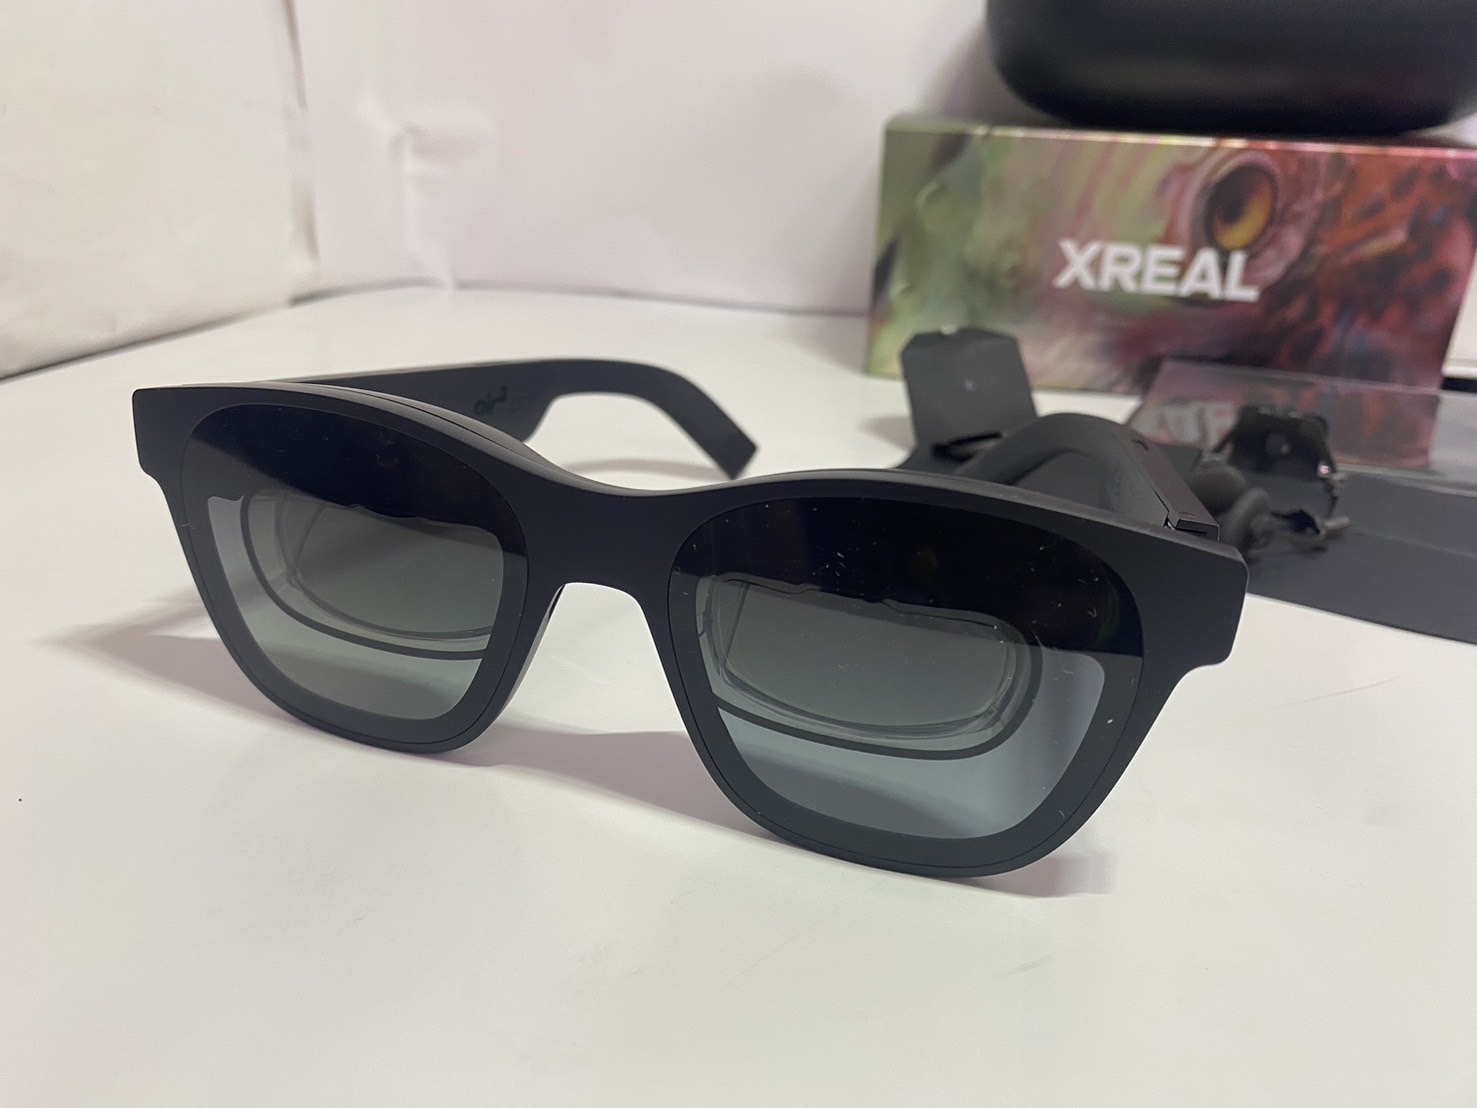  XREAL Air 2 Pro